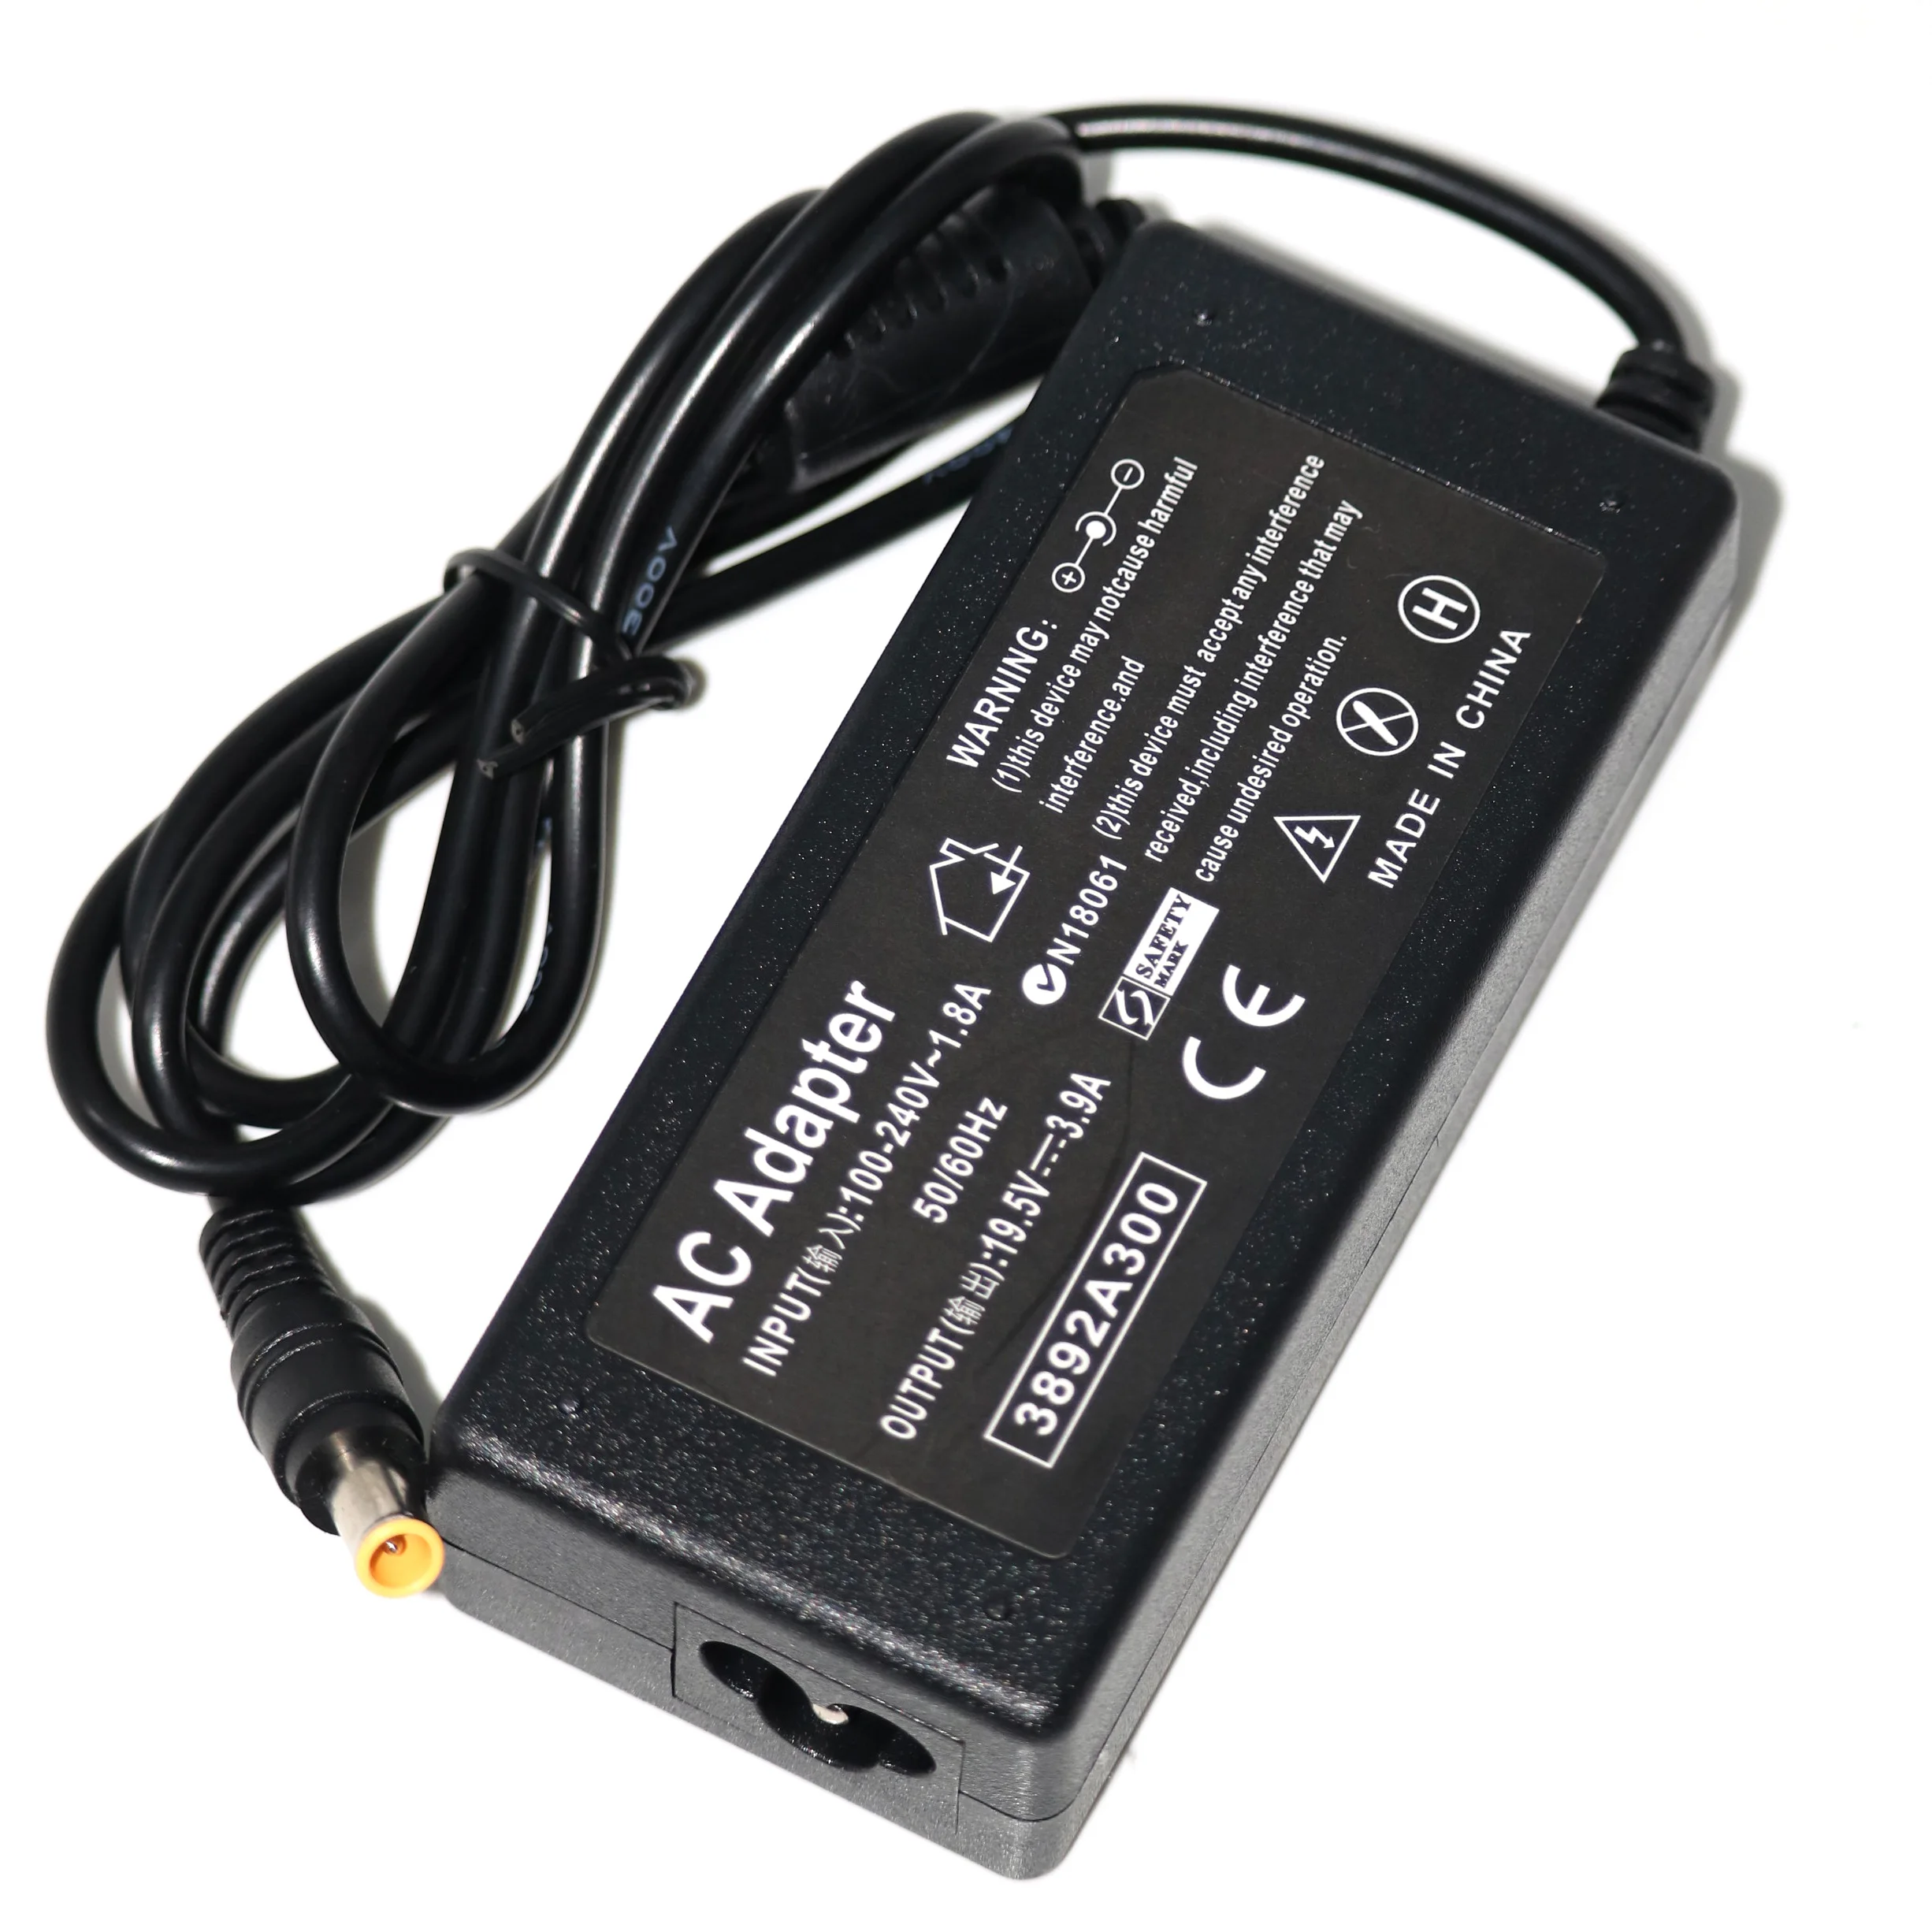 

19.5V 3.9A AC Adapter Charger Power Supply For Sony Vaio PCG-71211M VGP-AC19V34 PCG-71211V VGP-AC19V37 SVE141B11V PCG-612